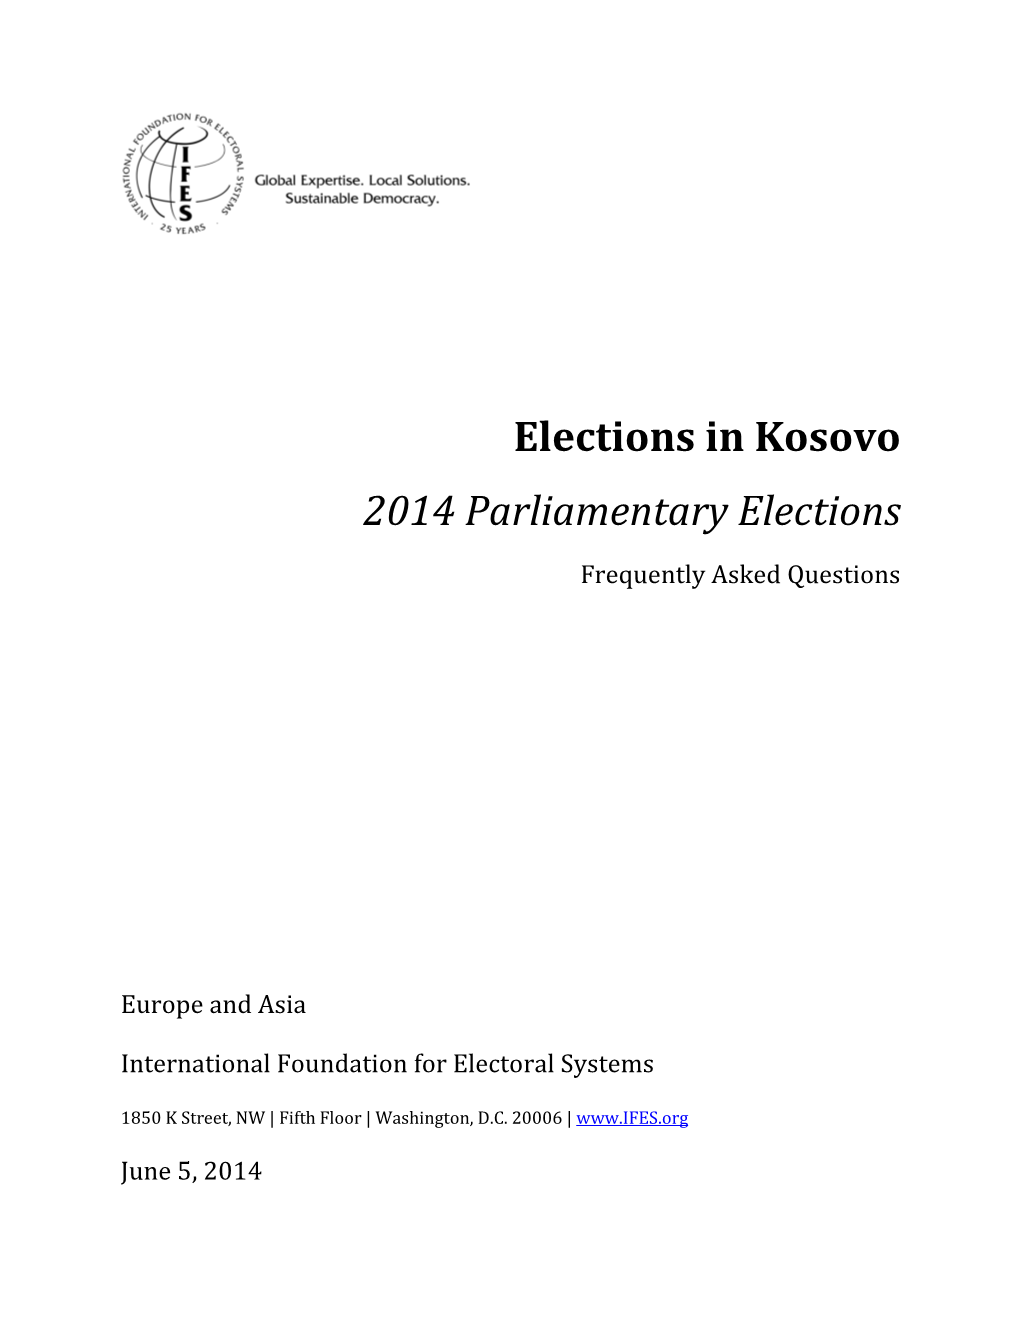 Elections in Kosovo 2014 Parliamentary Elections